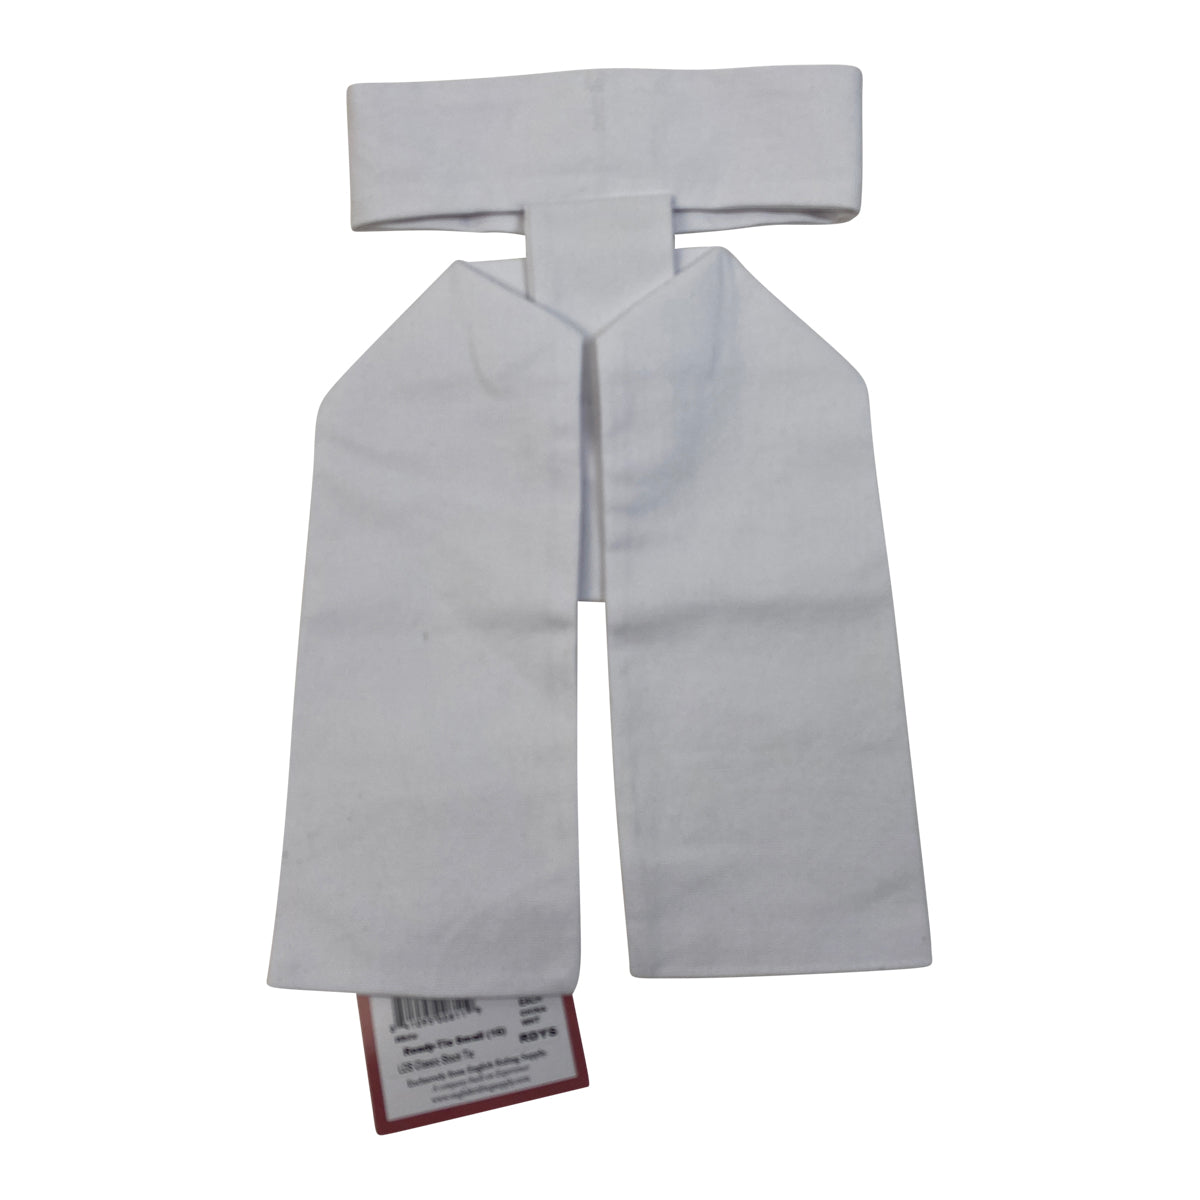 Ovation Classic 'Ready-Tie' Stock Tie in White